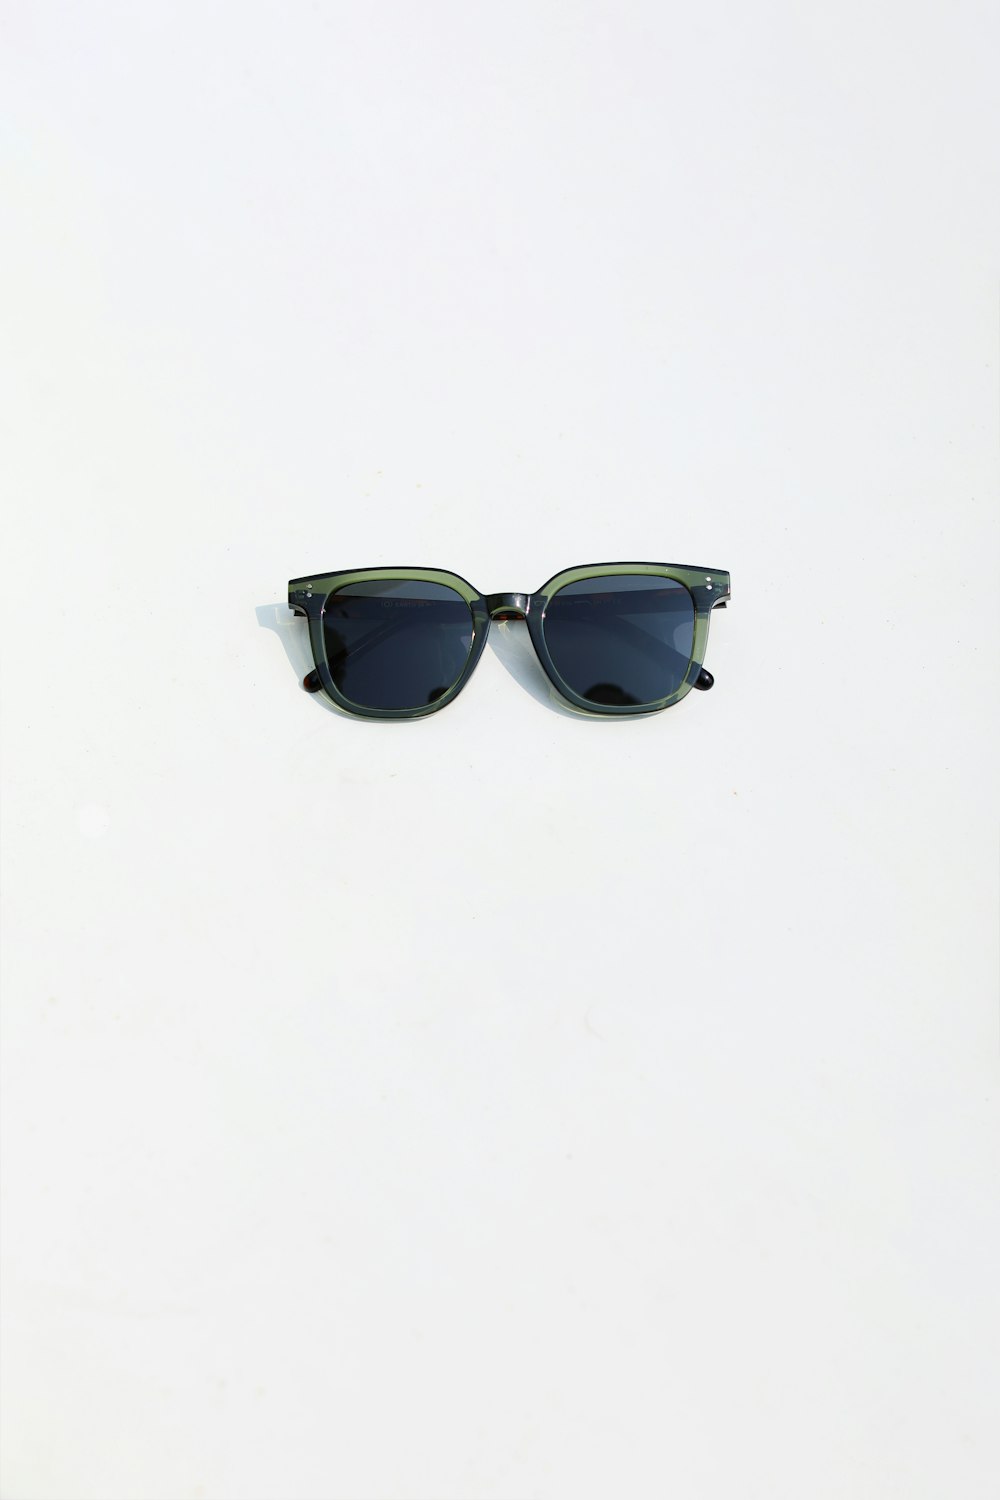 a pair of sunglasses sitting on top of a white surface